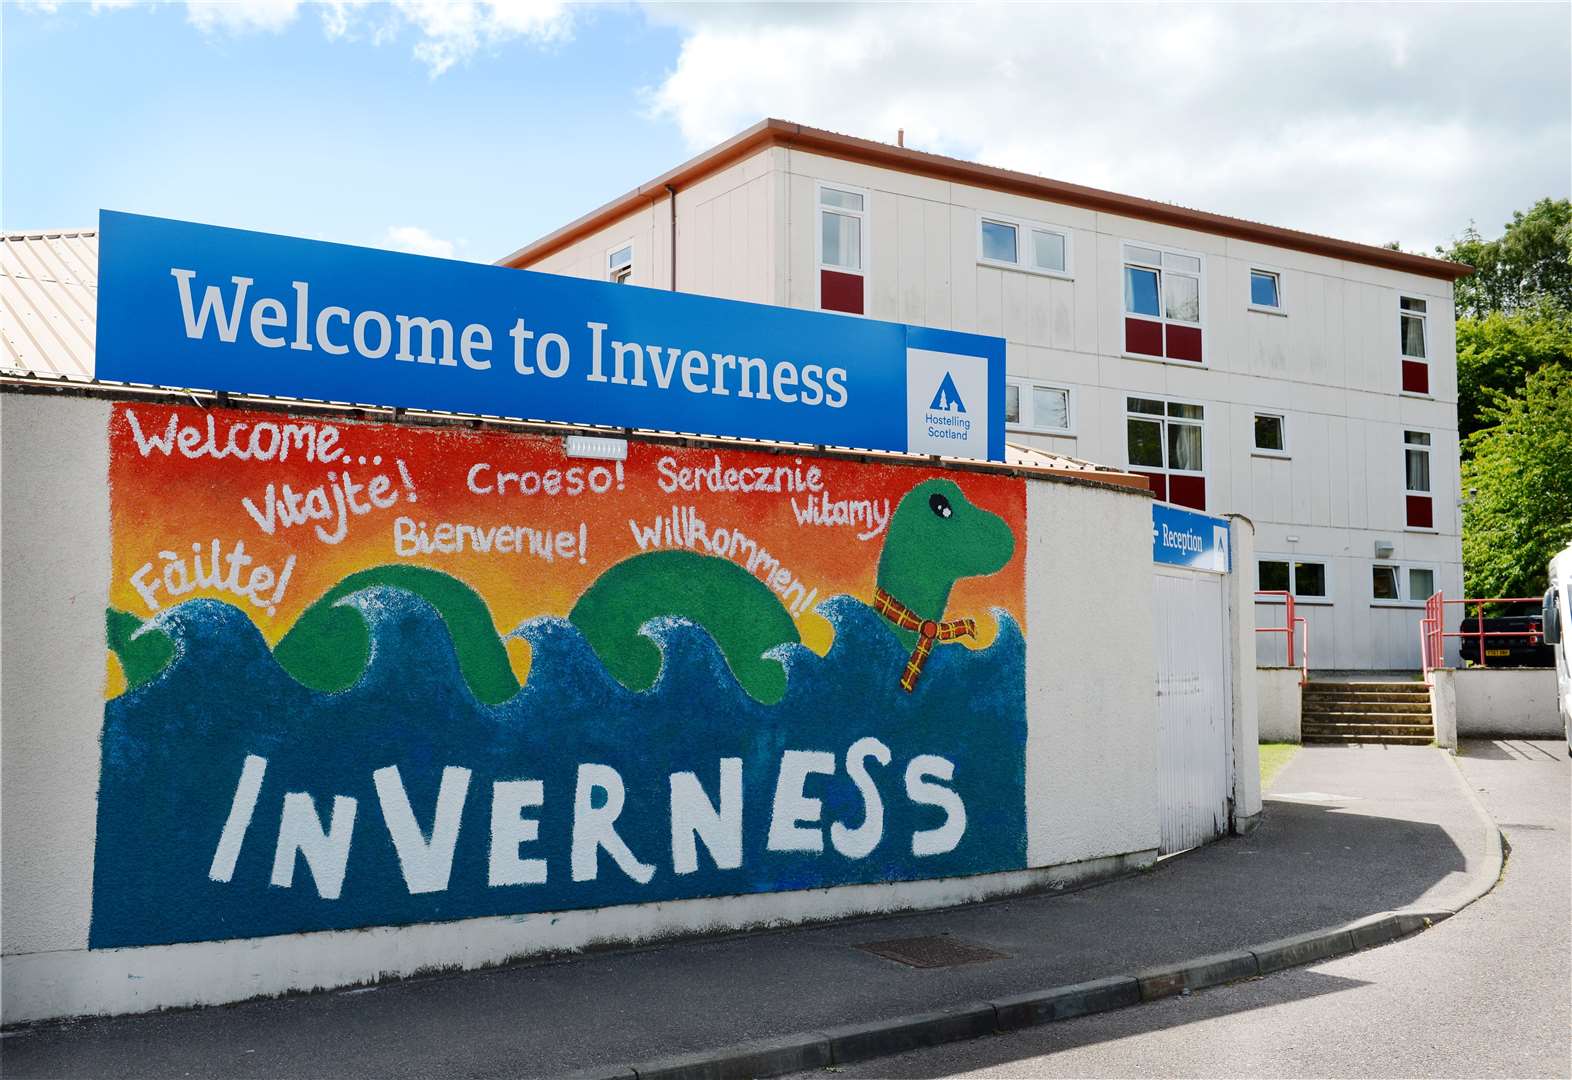 Inverness Youth Hostel is closed along with the rest of the network.